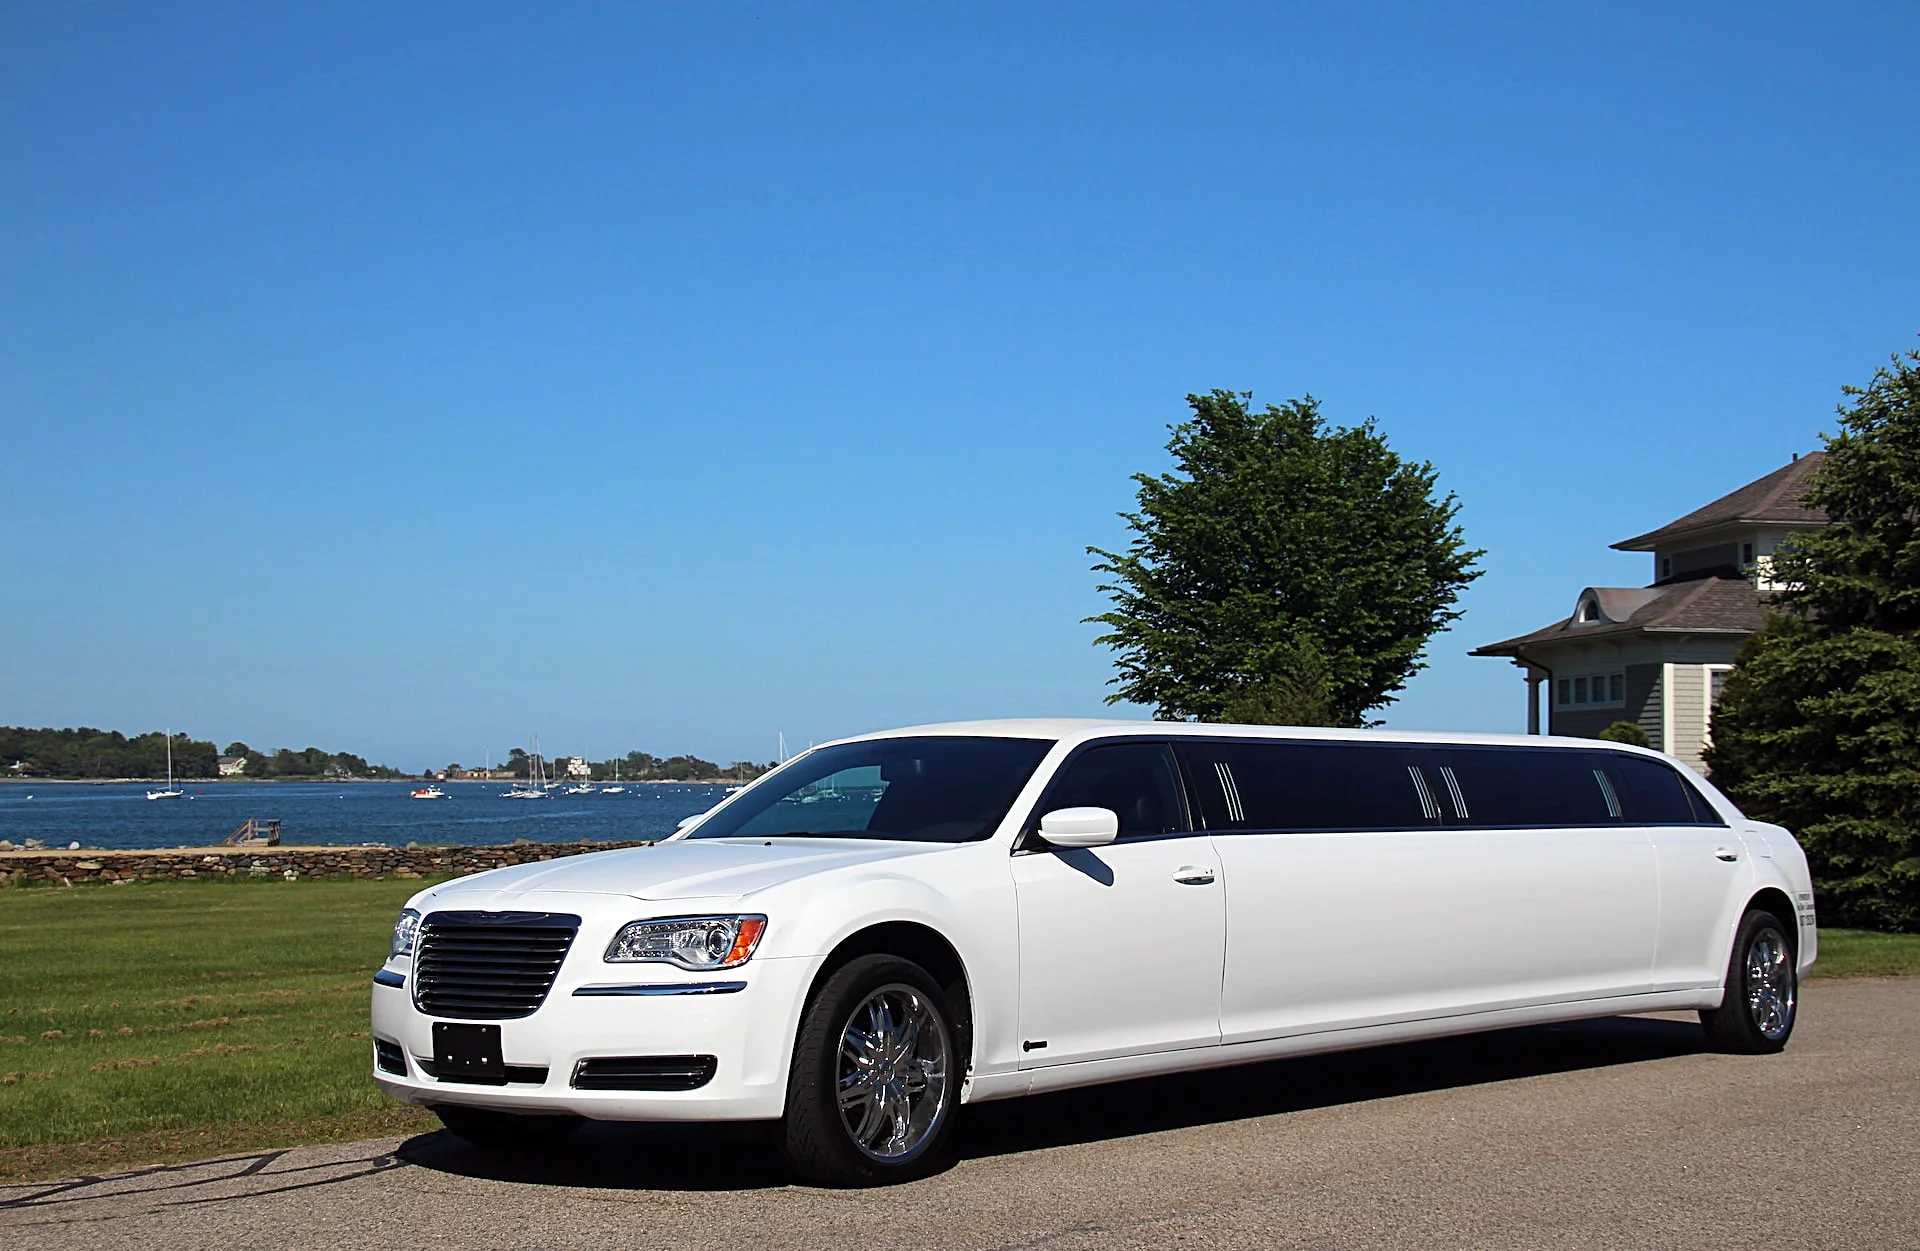 Cold Spring Harbor Limo Service